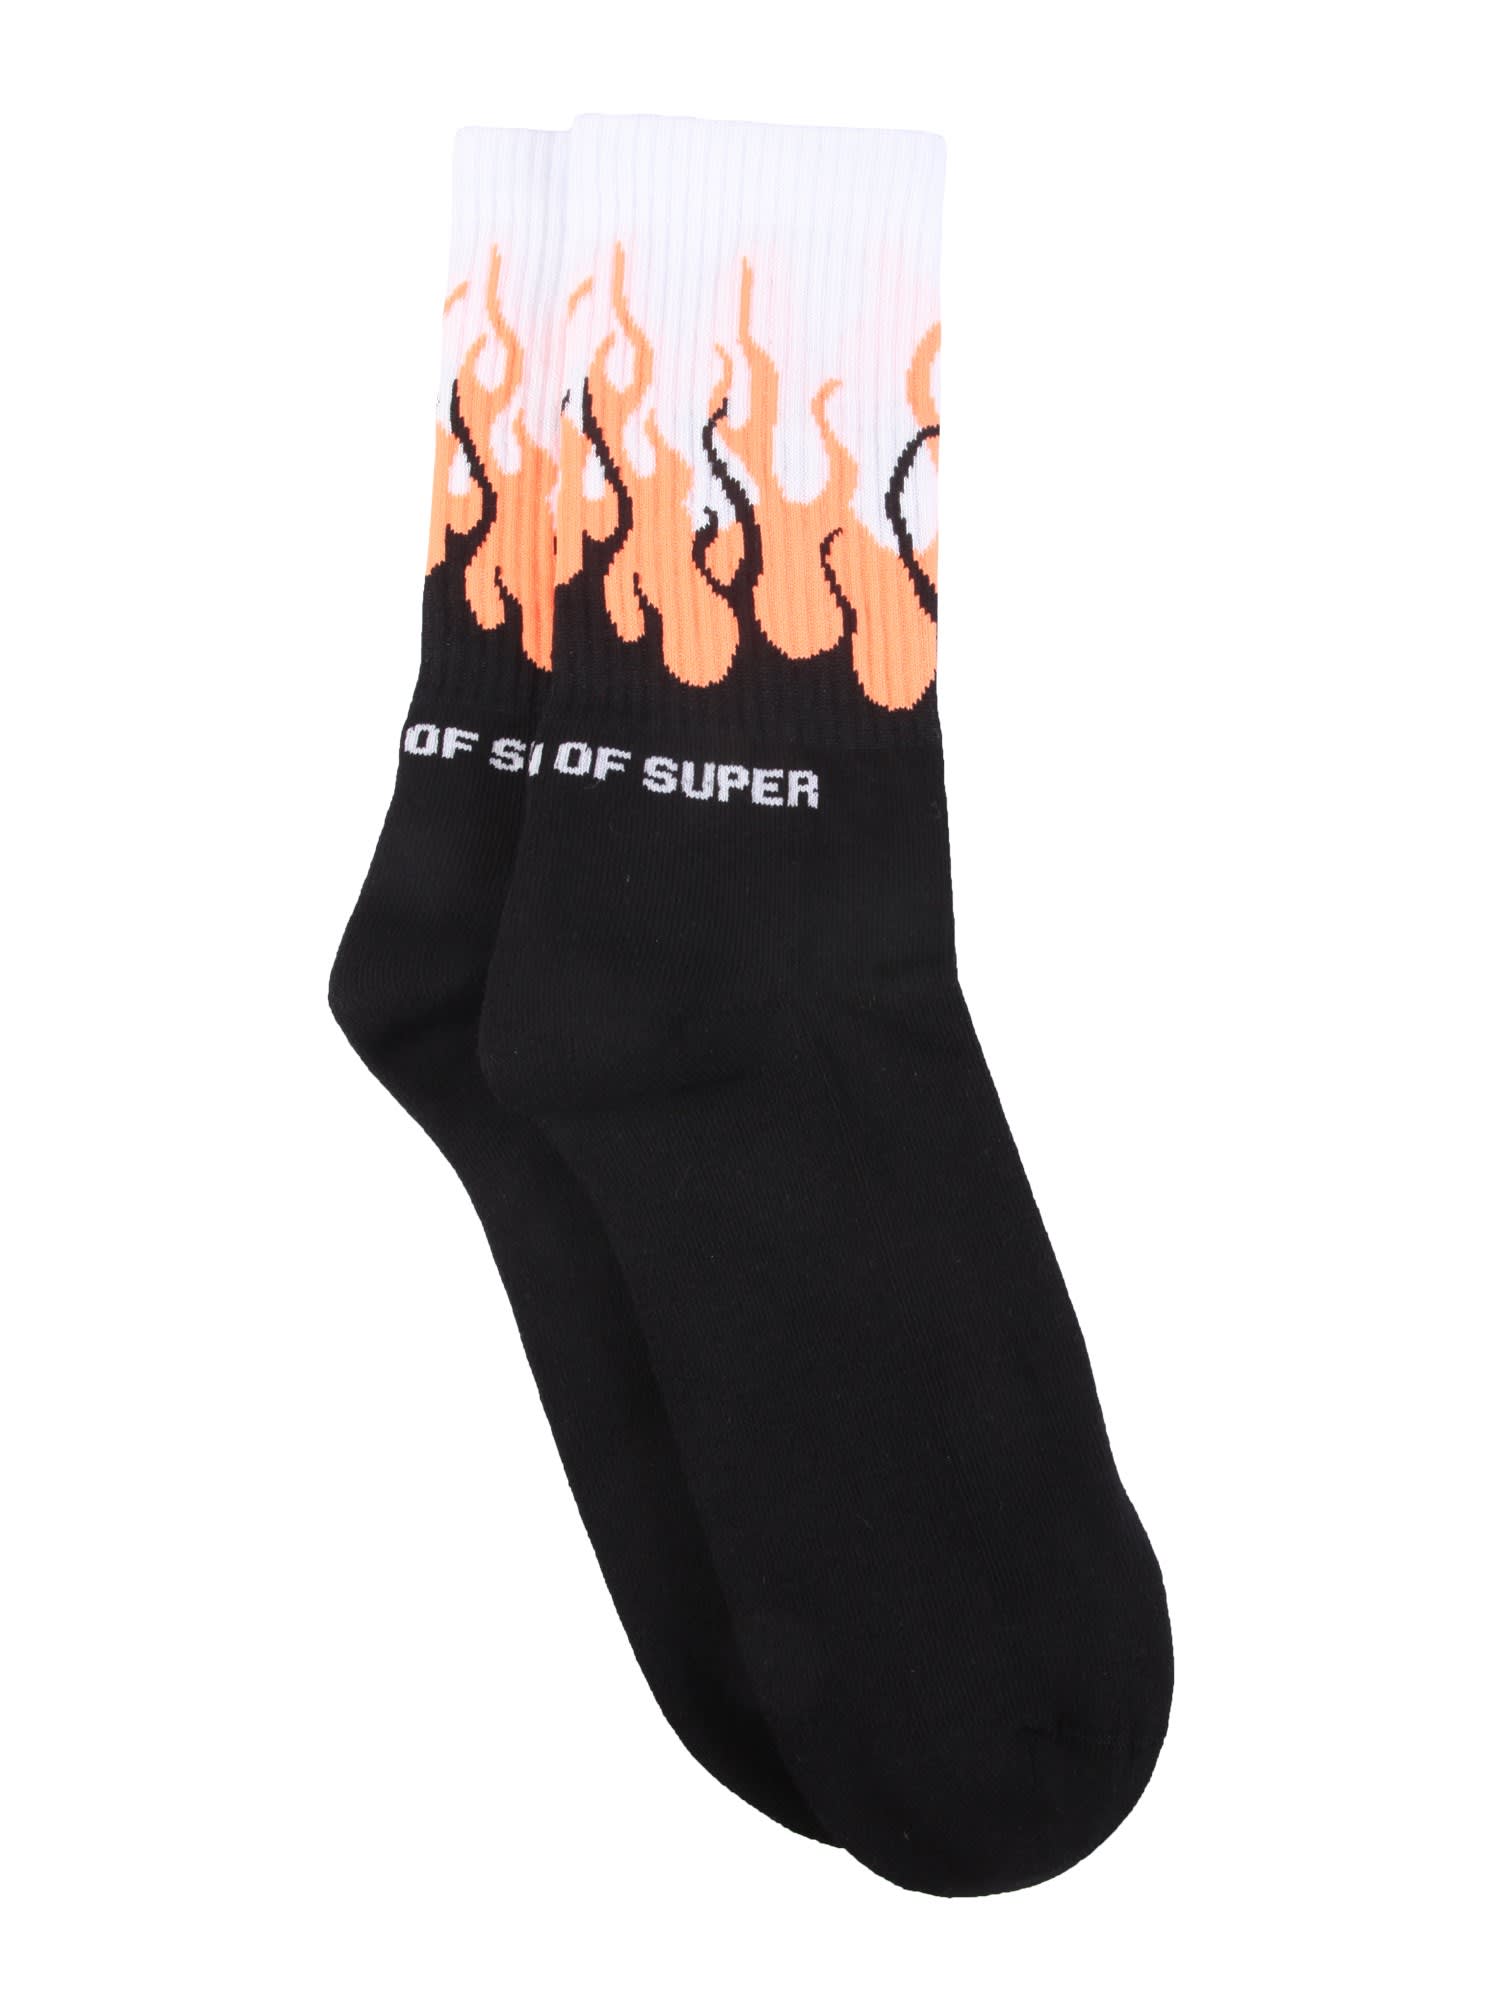 Vision Of Super SOCKS WITH FLUO FLAMES